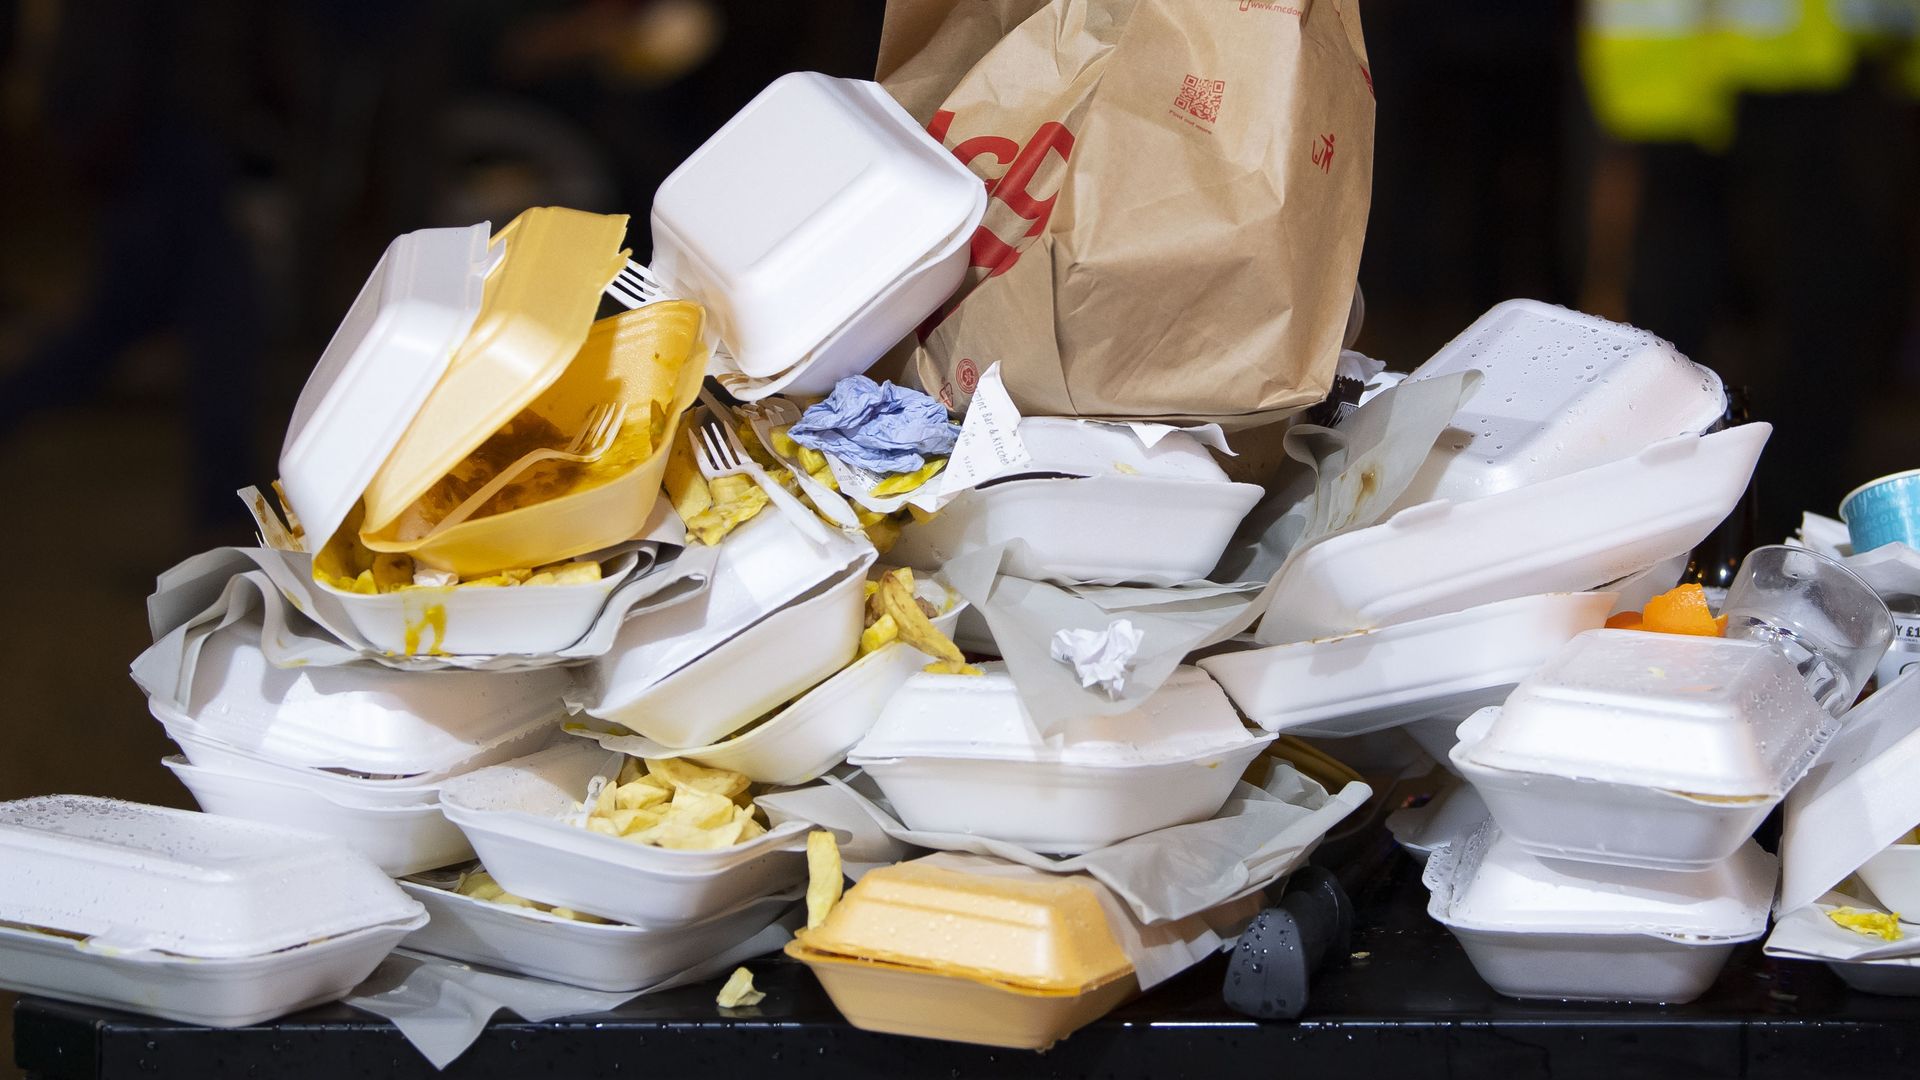 A pile of styrofoam food containers 